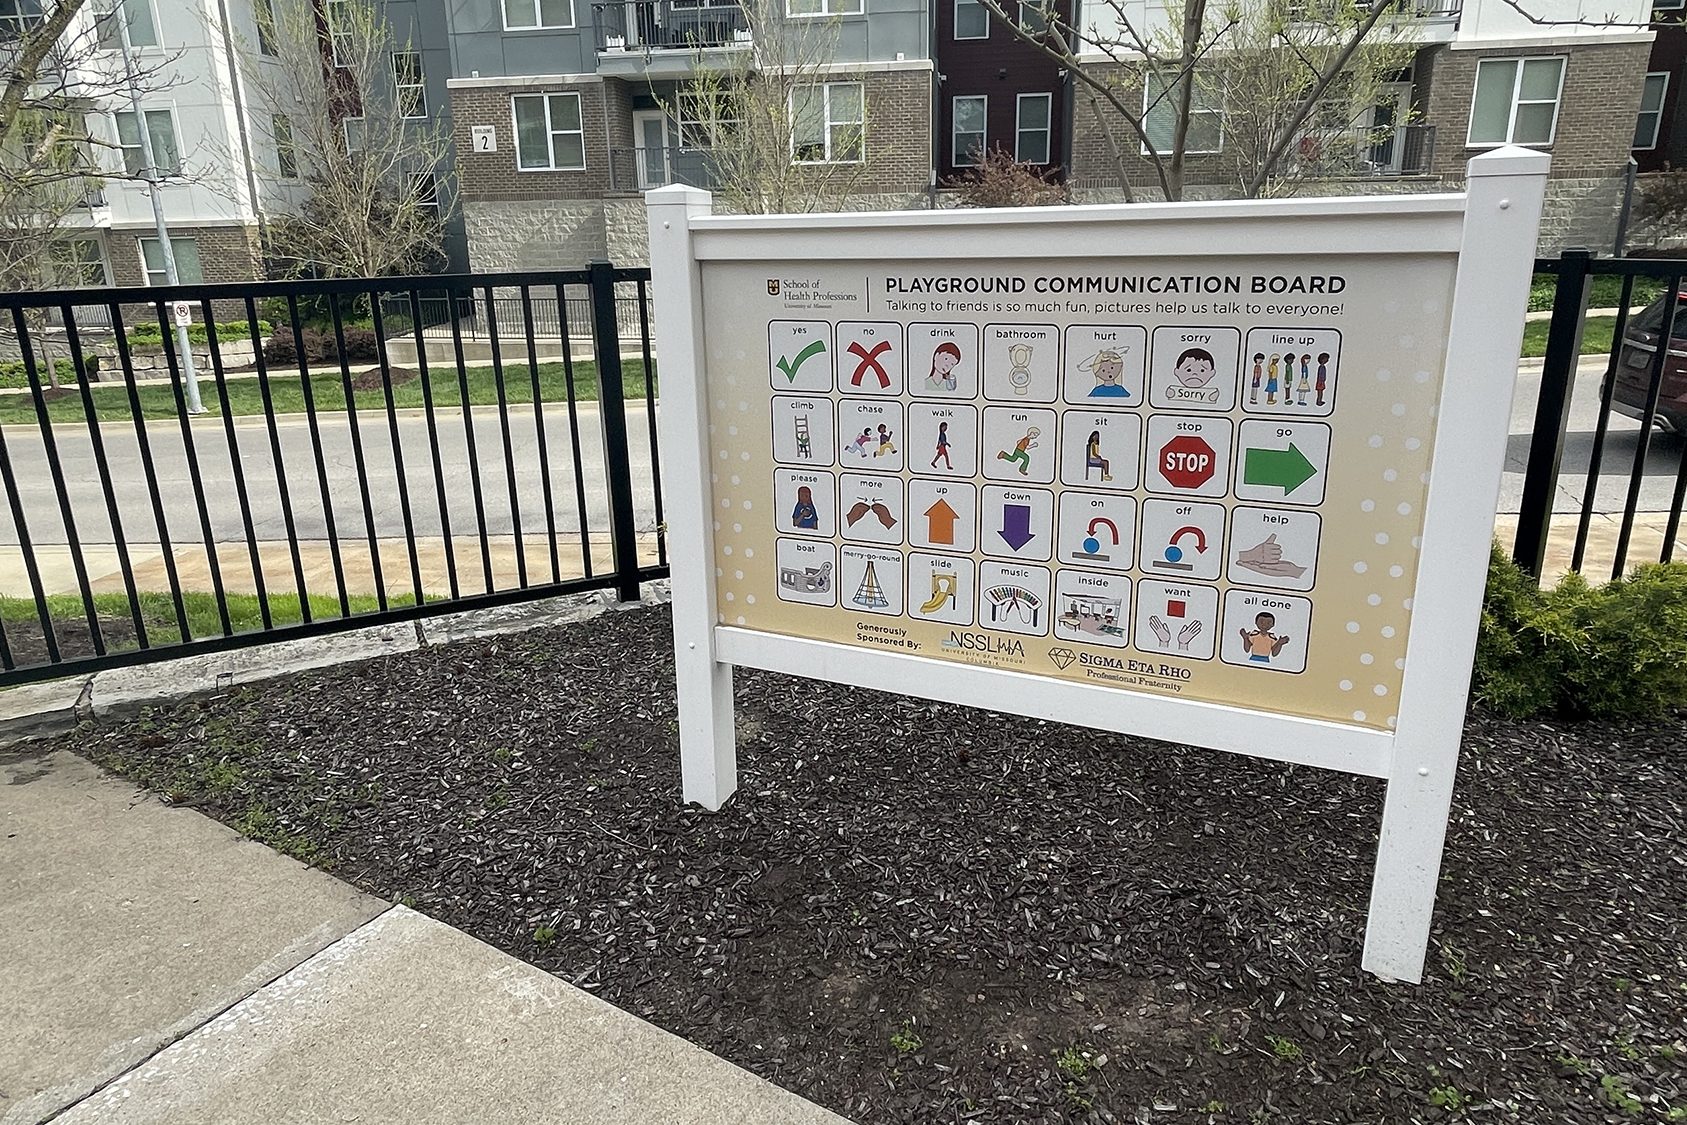 a communication board on the inclusive playground